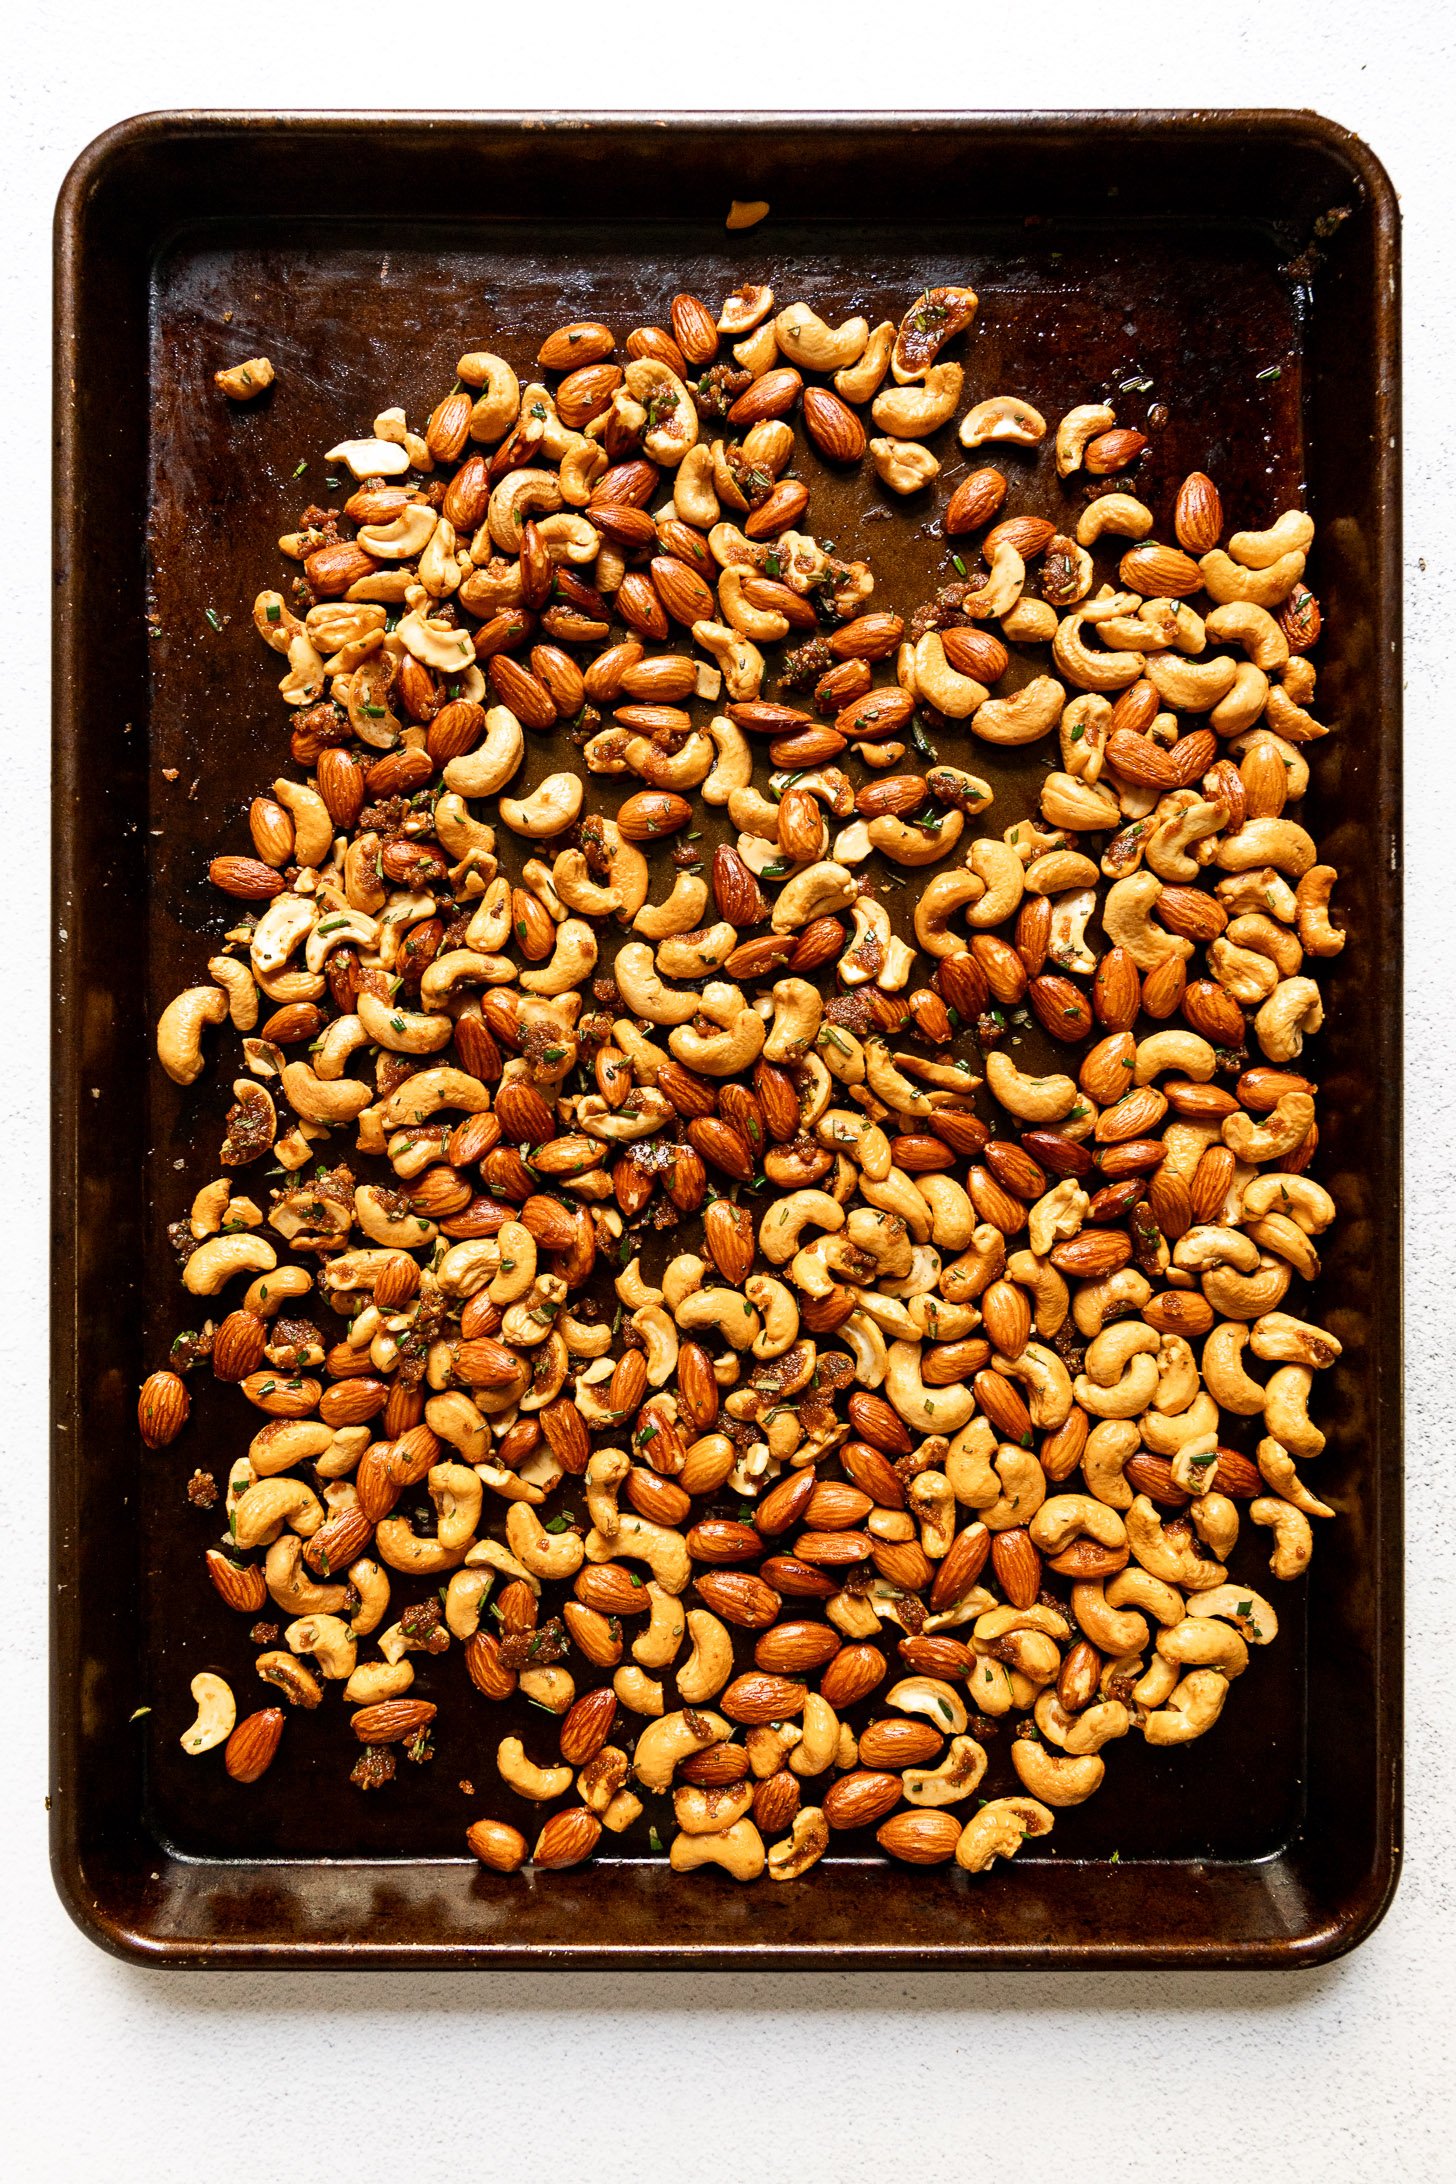 Roasted nuts mixed with sweet and spicy mix.